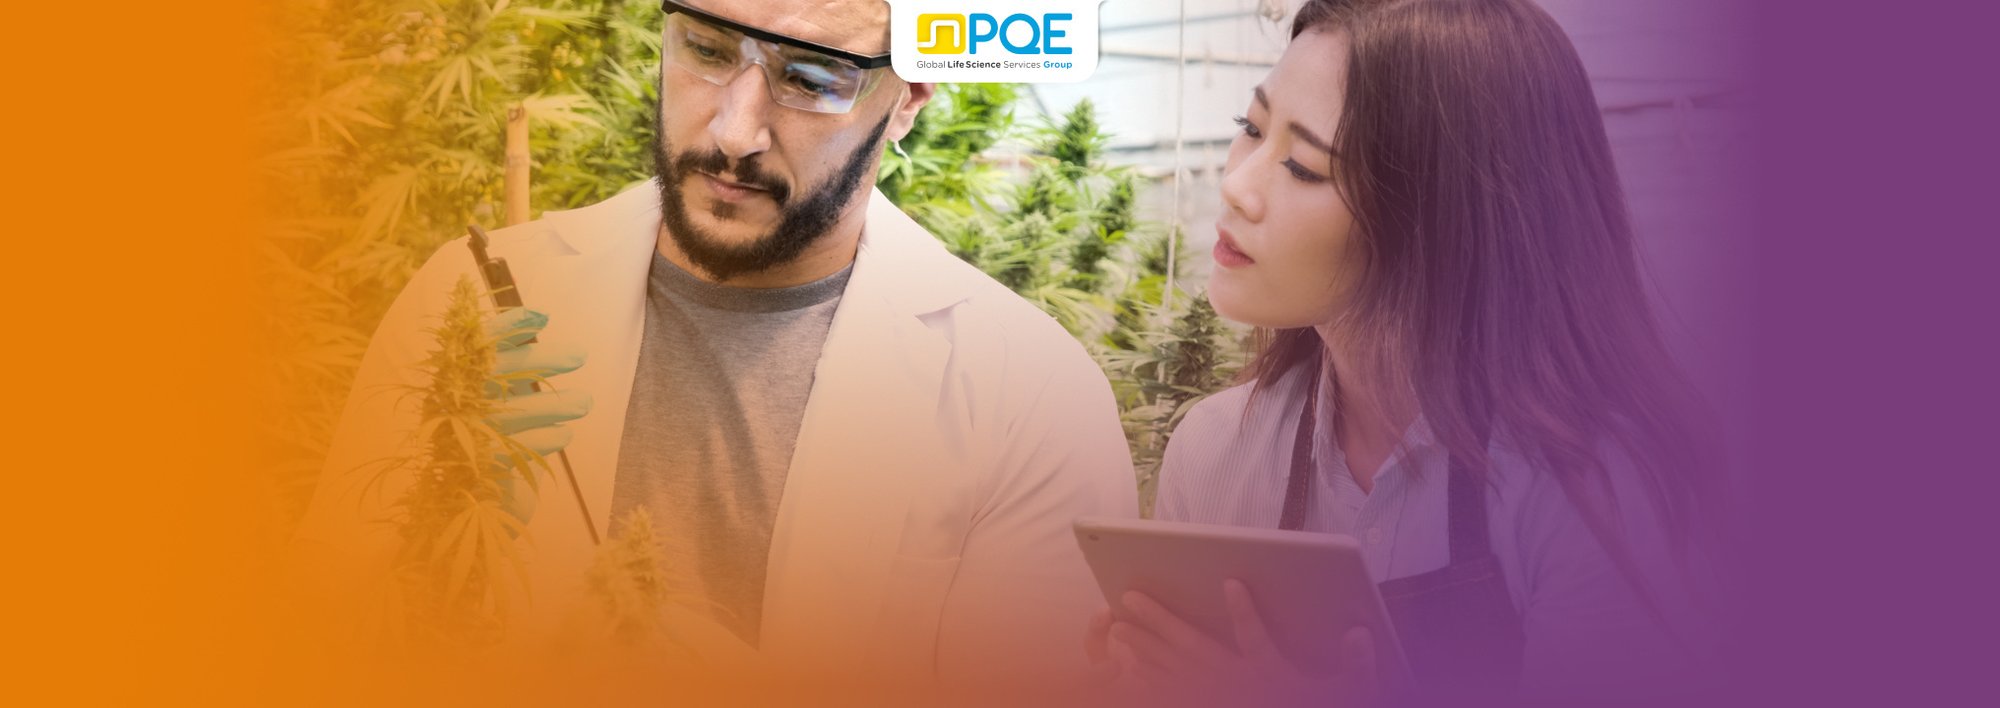 Quality Control Medical Cannabis_Site PQE_1